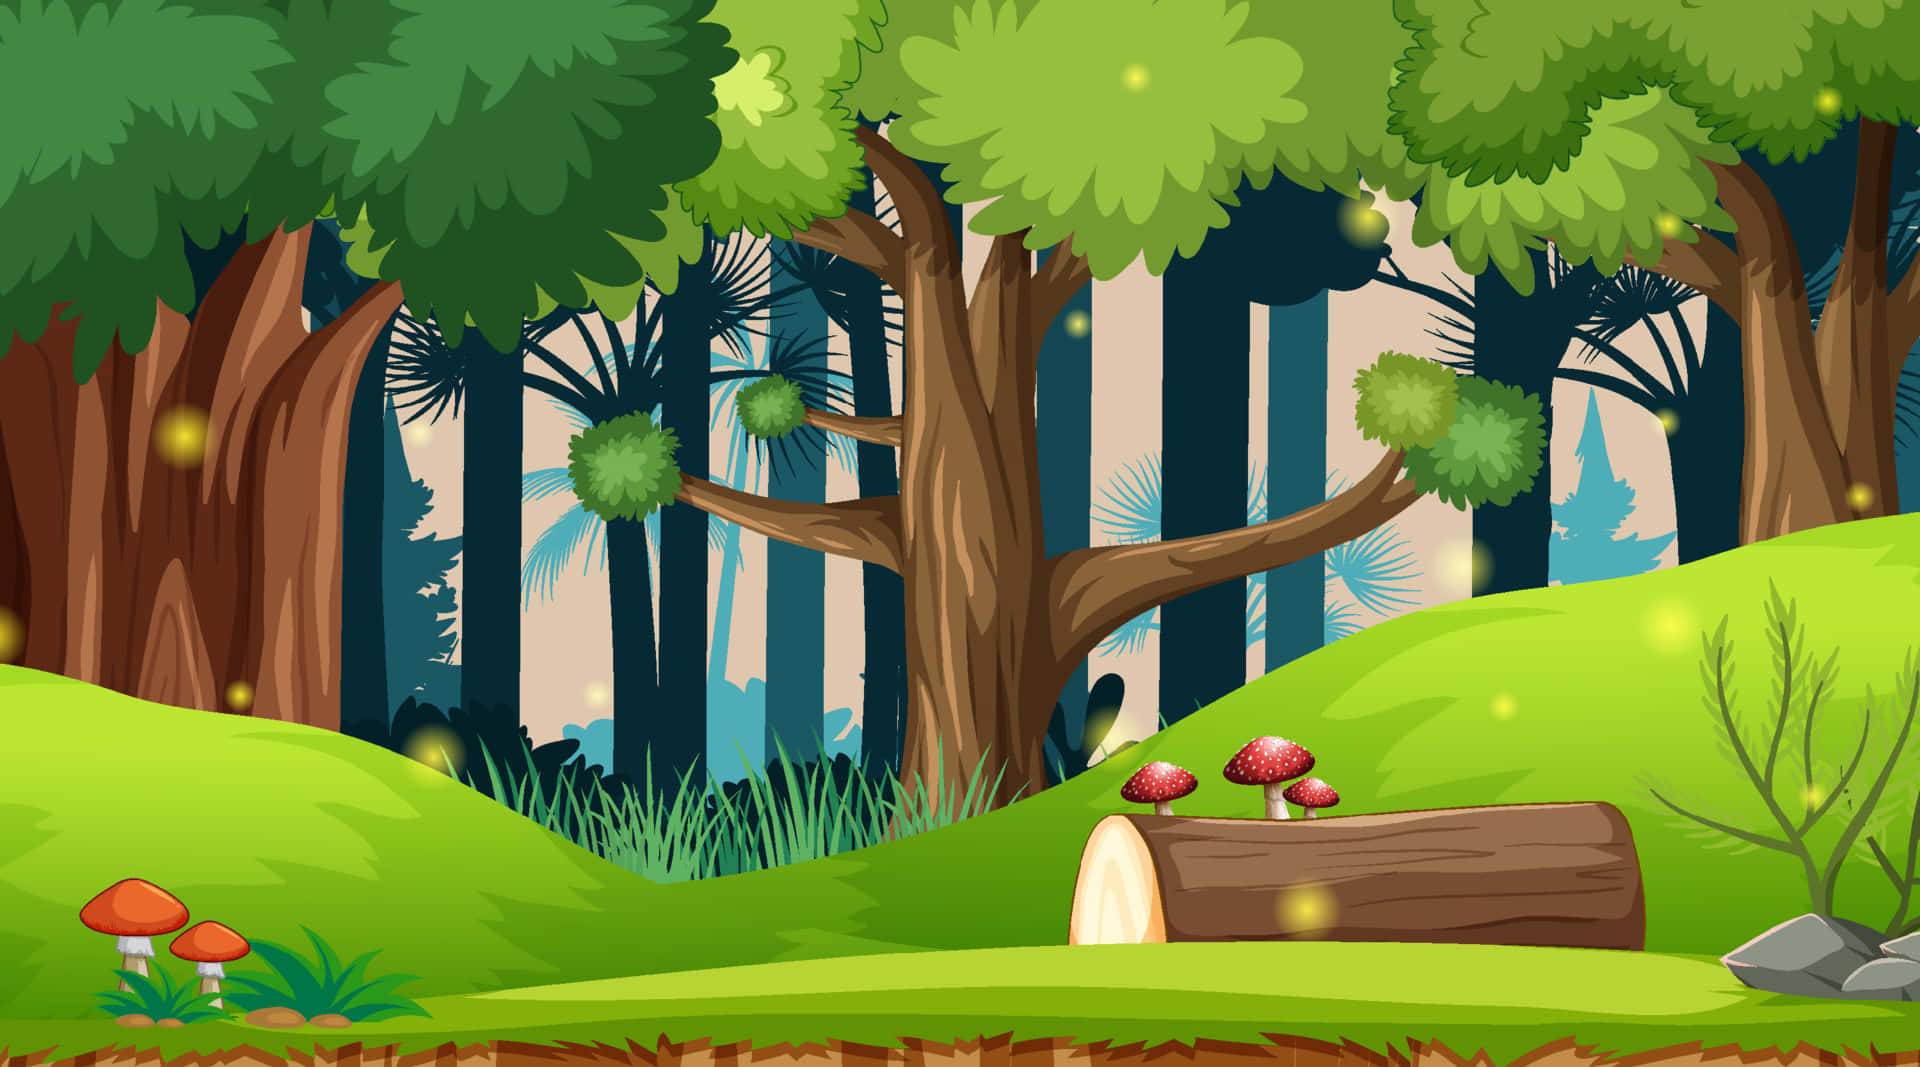 Download Cartoon Forest Scene With Trees And Mushrooms 